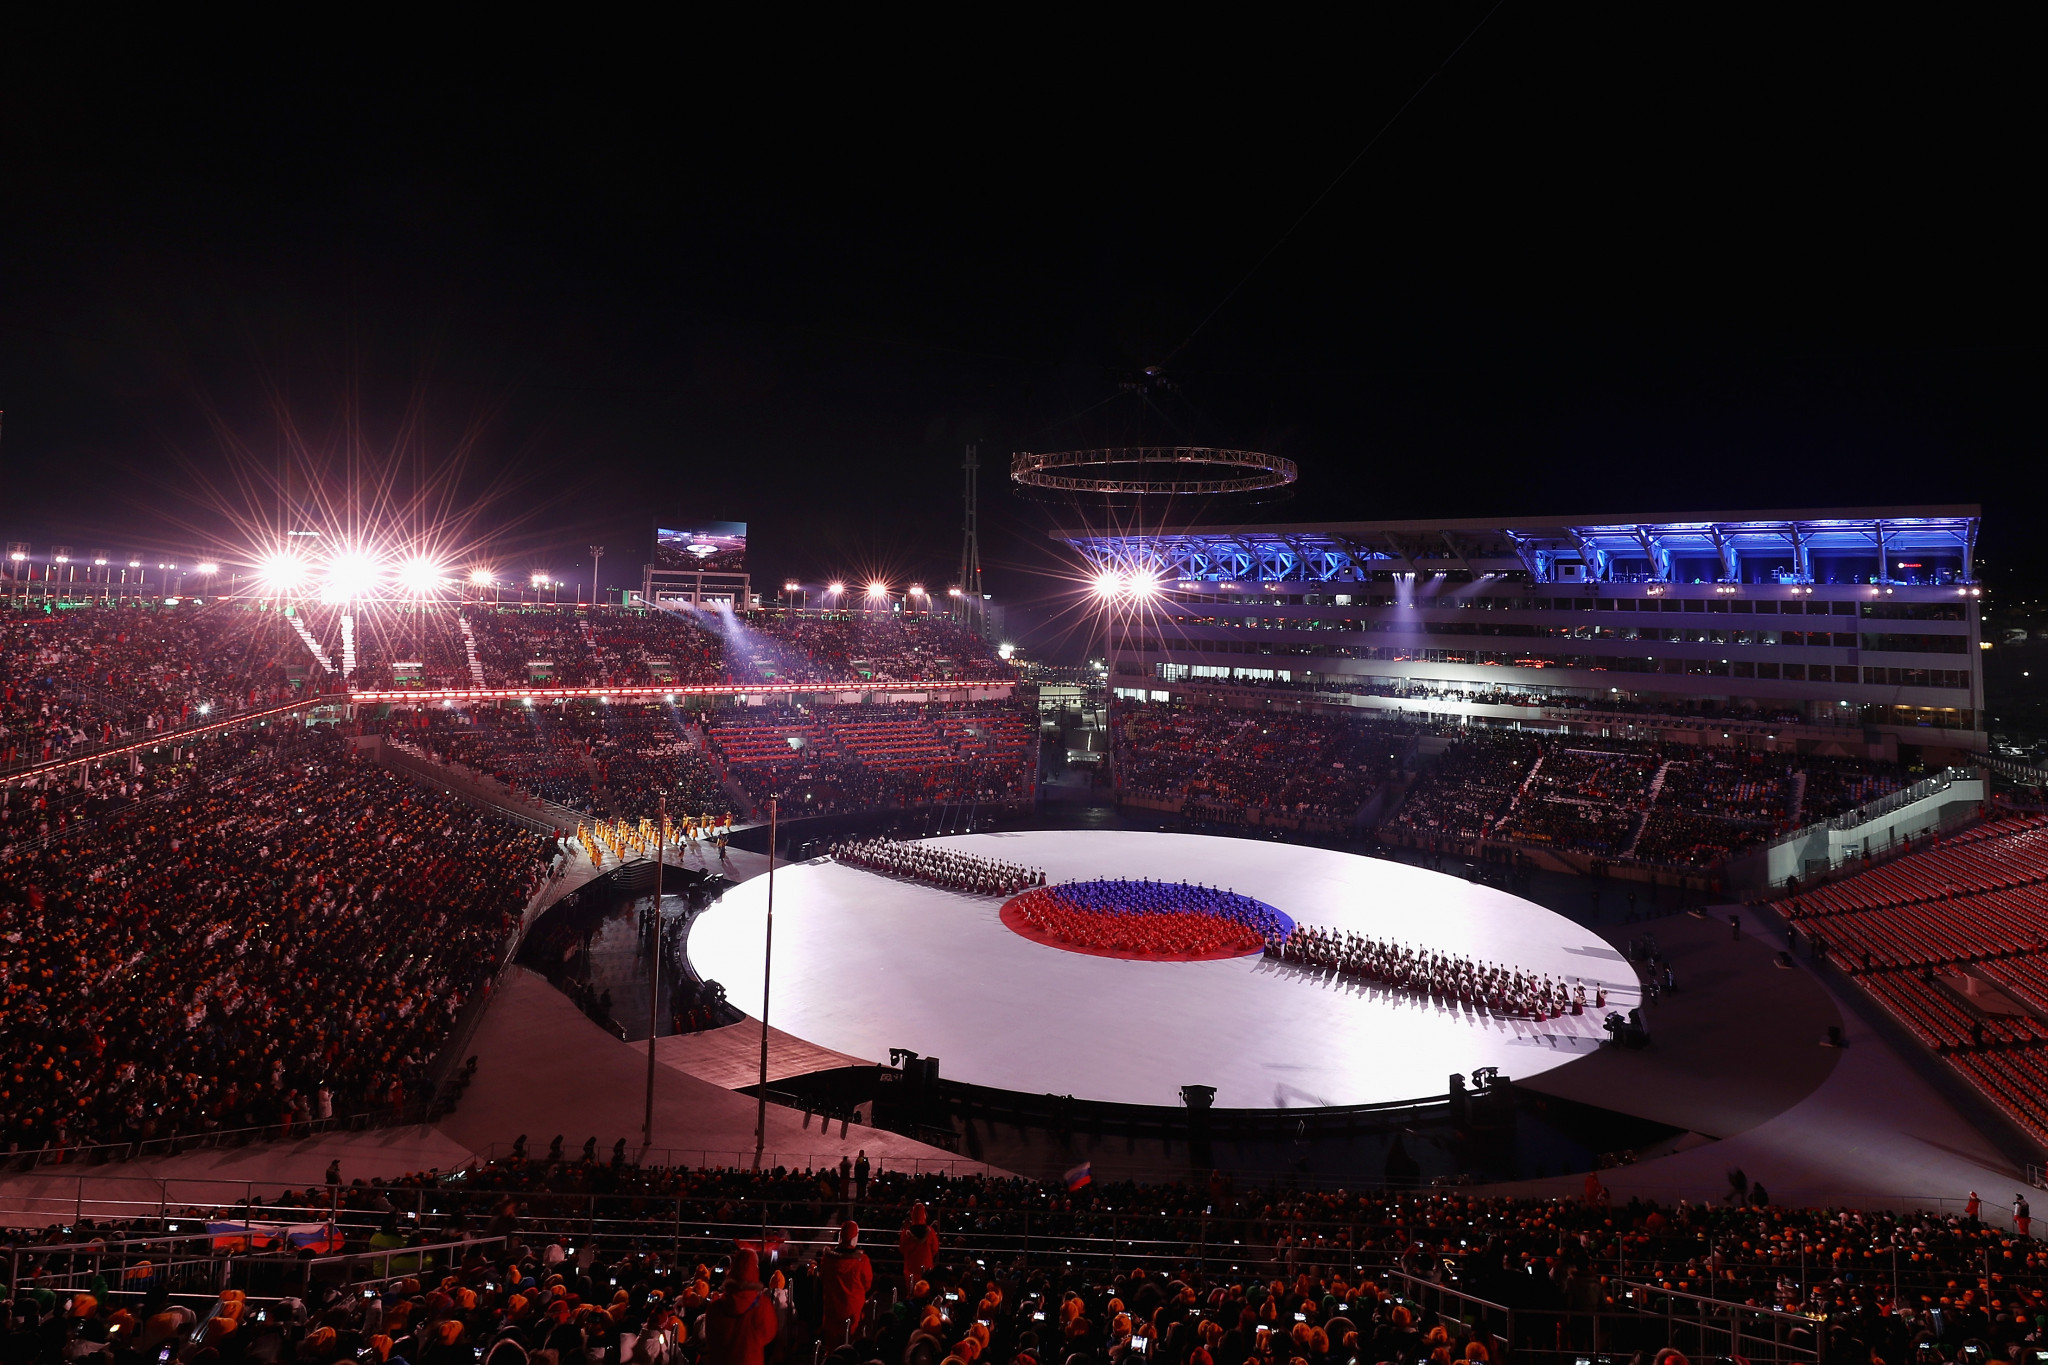 Significant disruption was caused by a cyber attack which hit the Opening Ceremony of the Pyeongchang Winter Olympics in February 2018 ©Getty Images